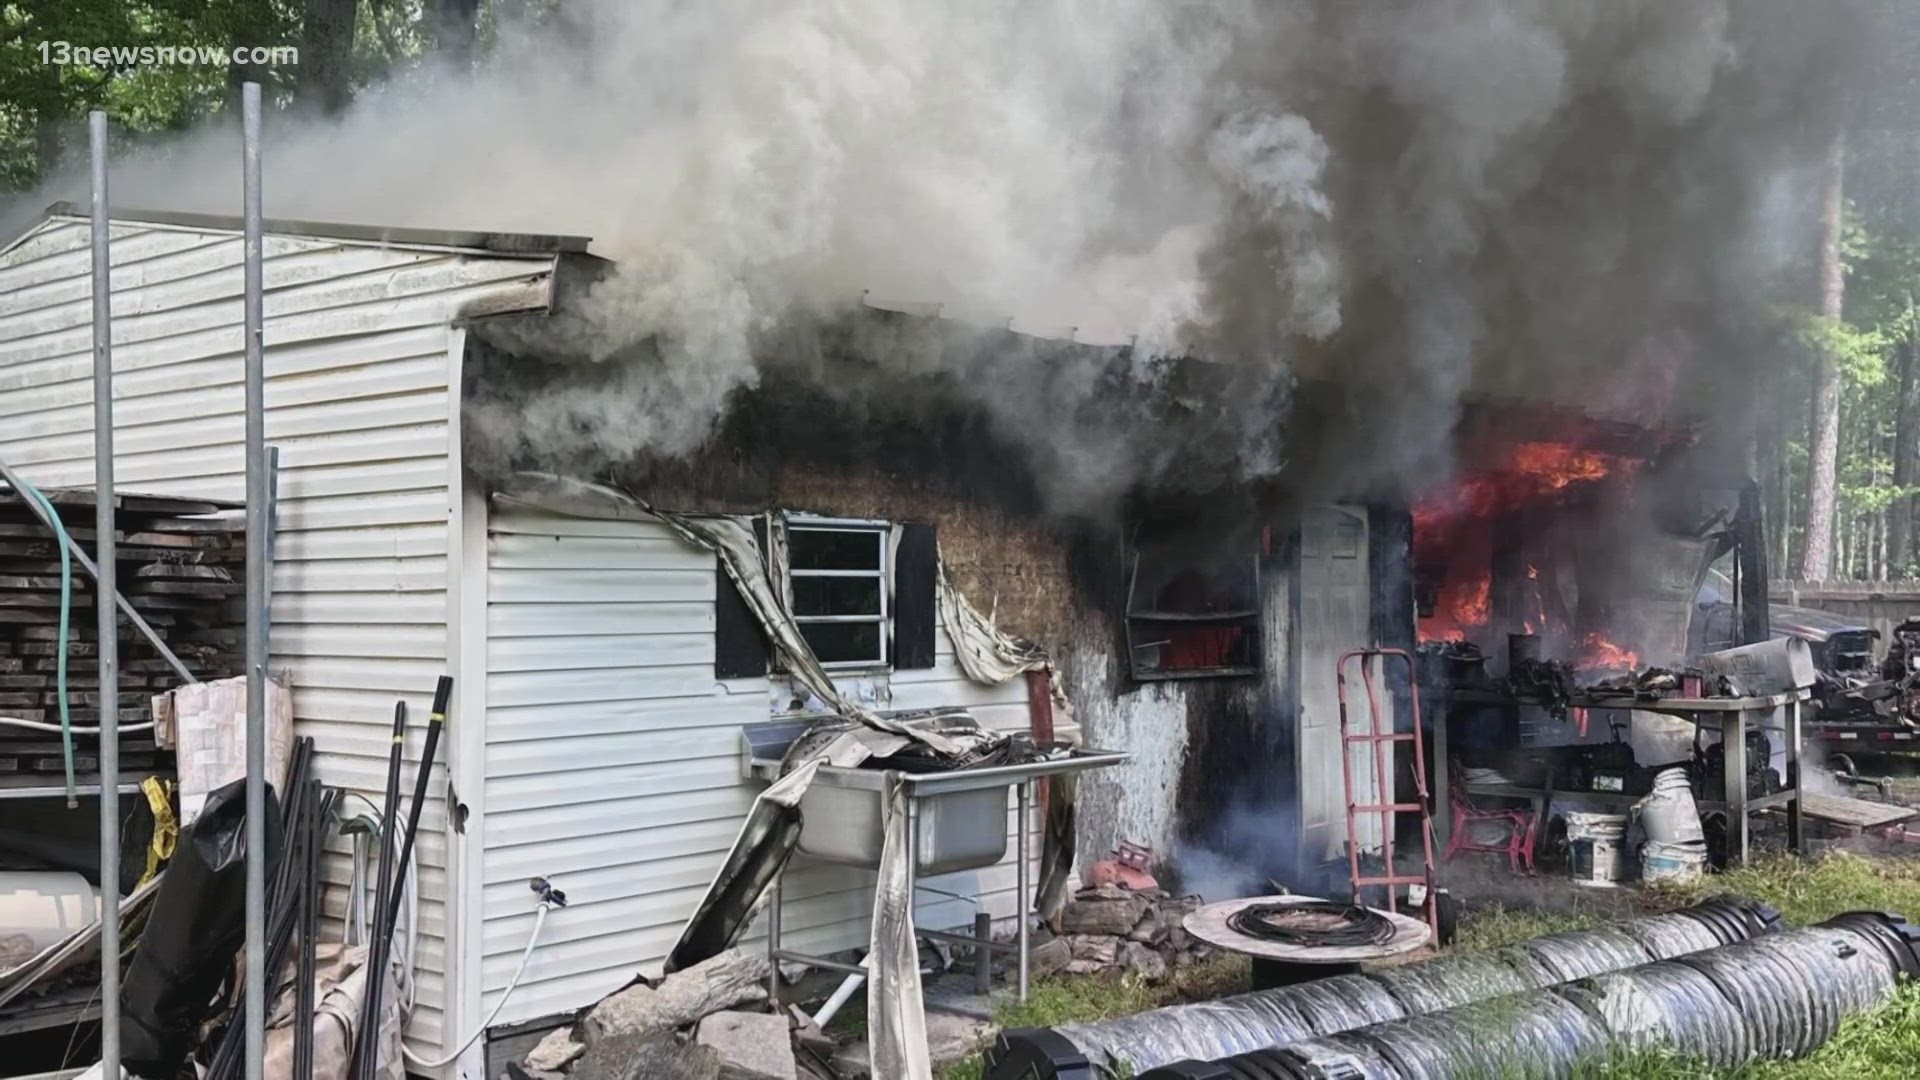 The Chesapeake Fire Department responded to a fire in the 1300 block of Taft Road.